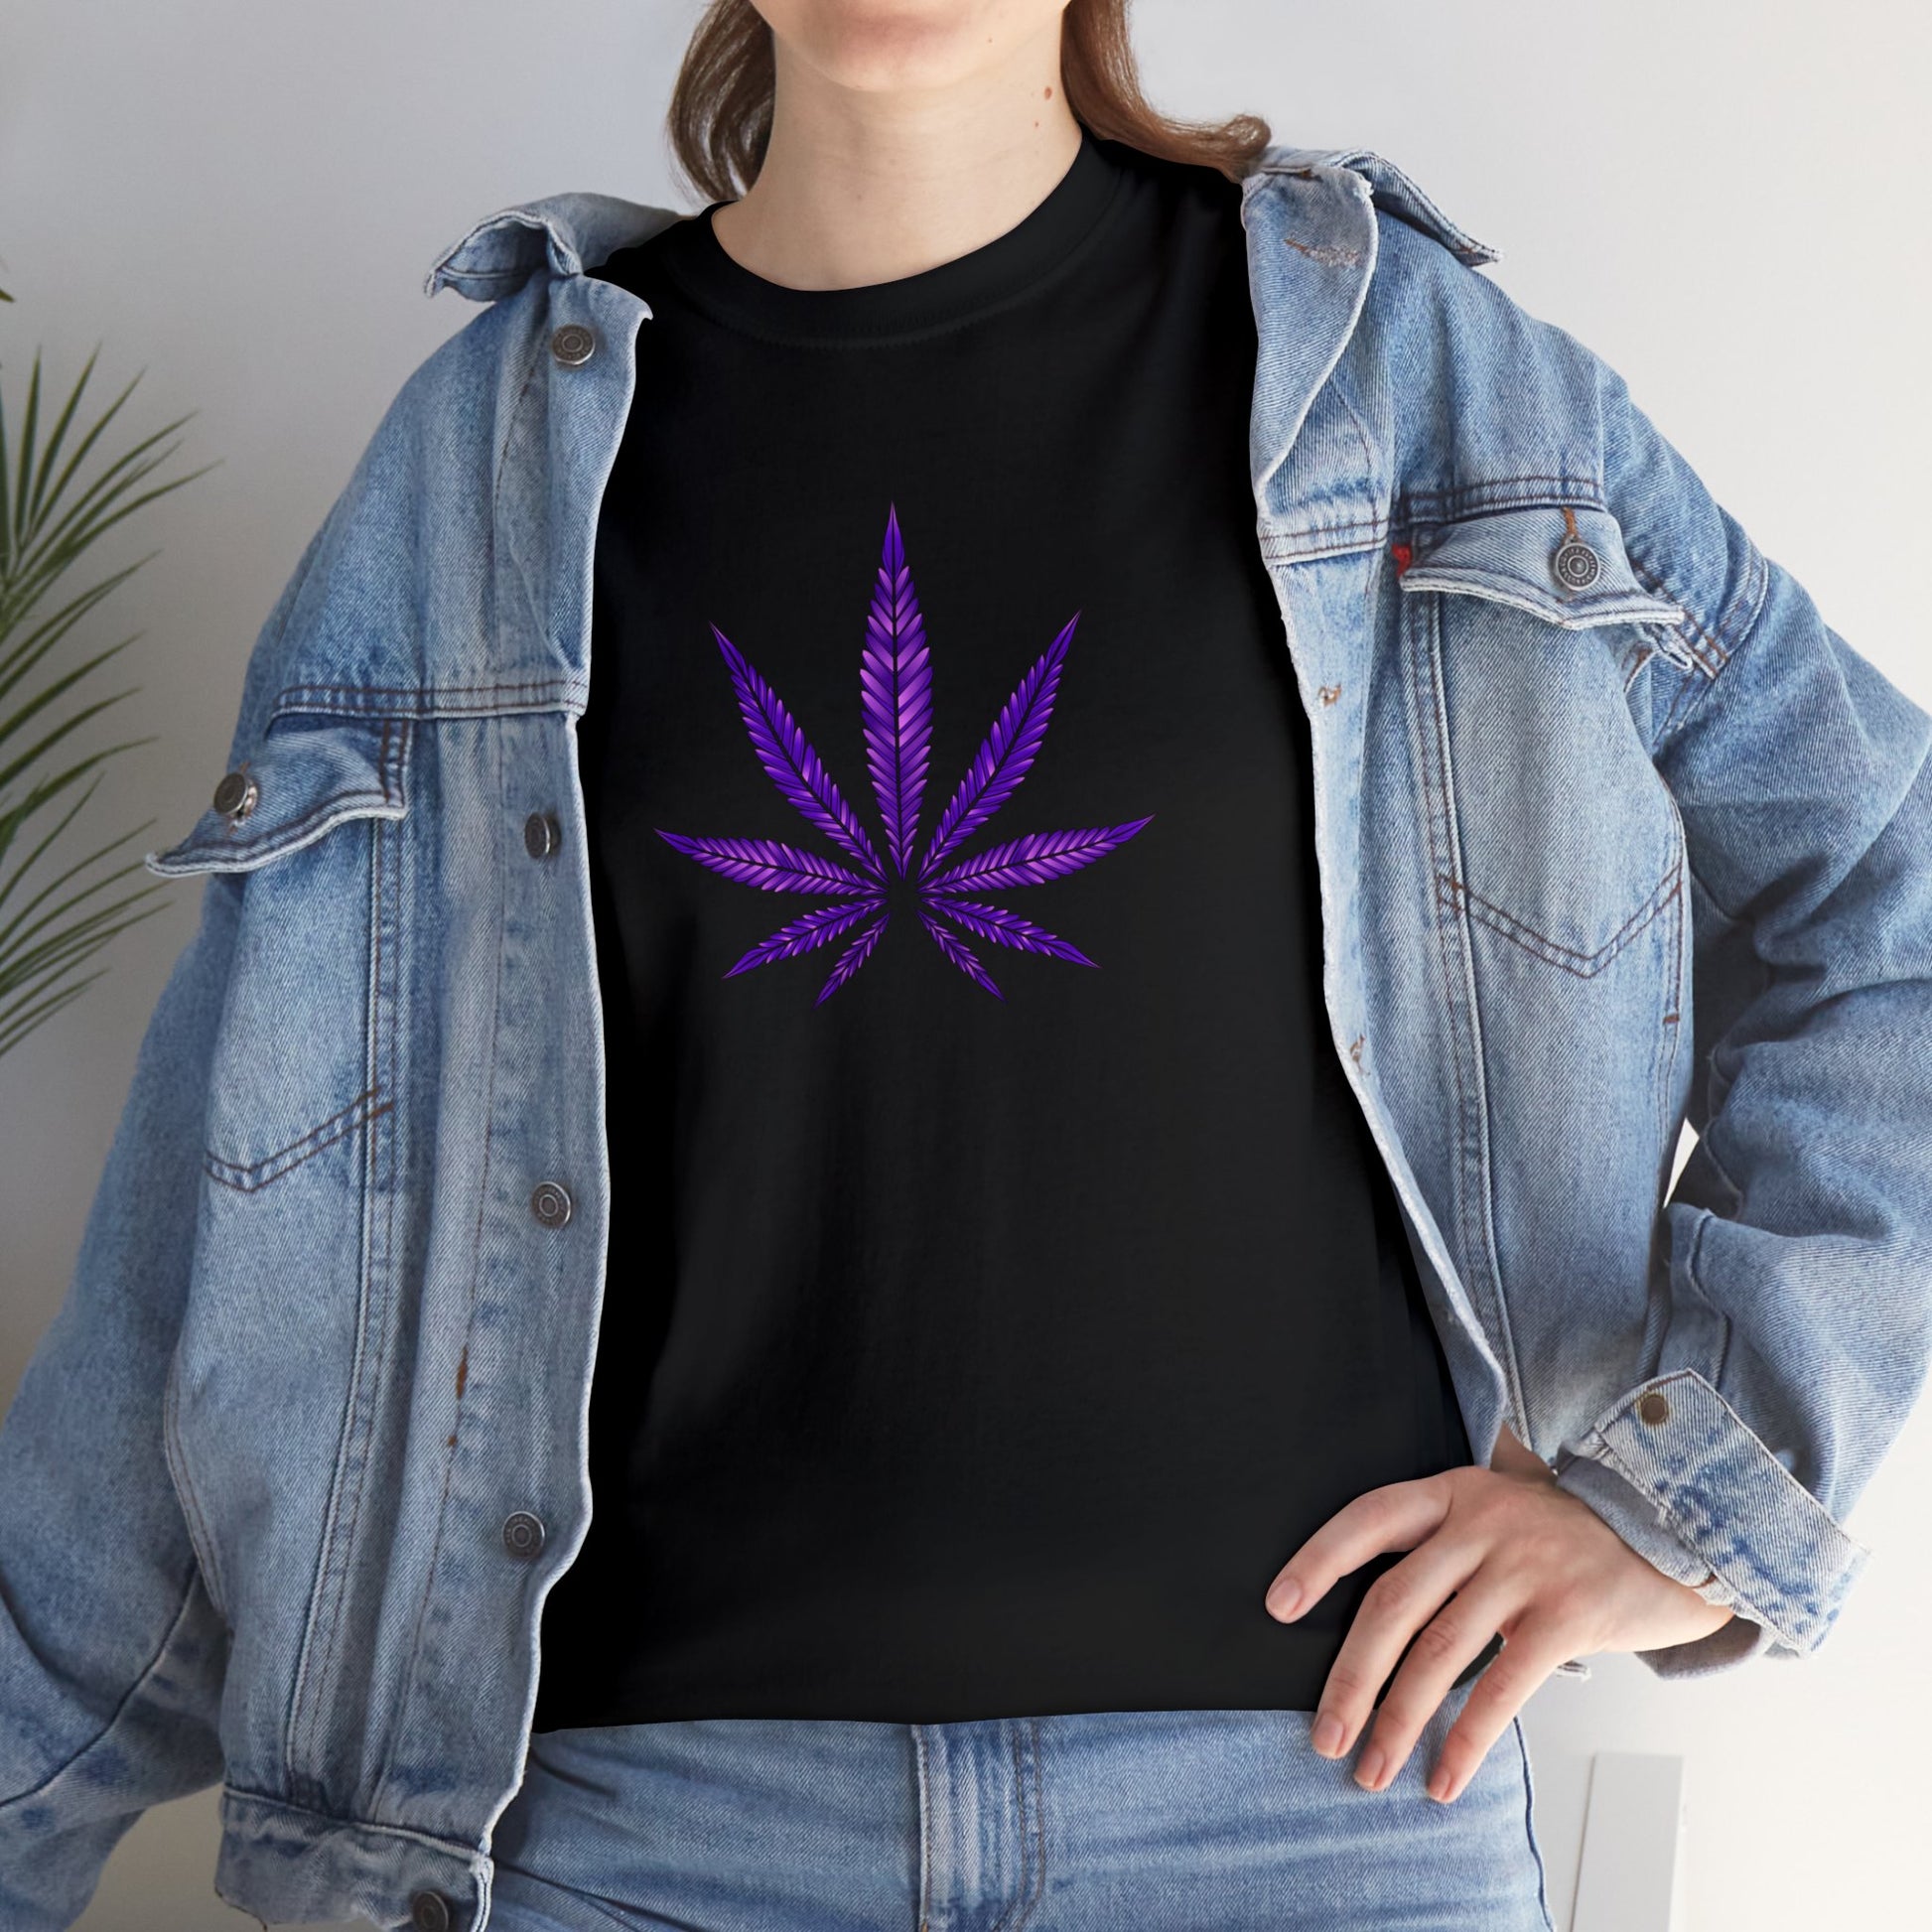 A person wearing a black t-shirt with a vibrant Purple Cannabis Leaf Tee design, layered under an open denim jacket.